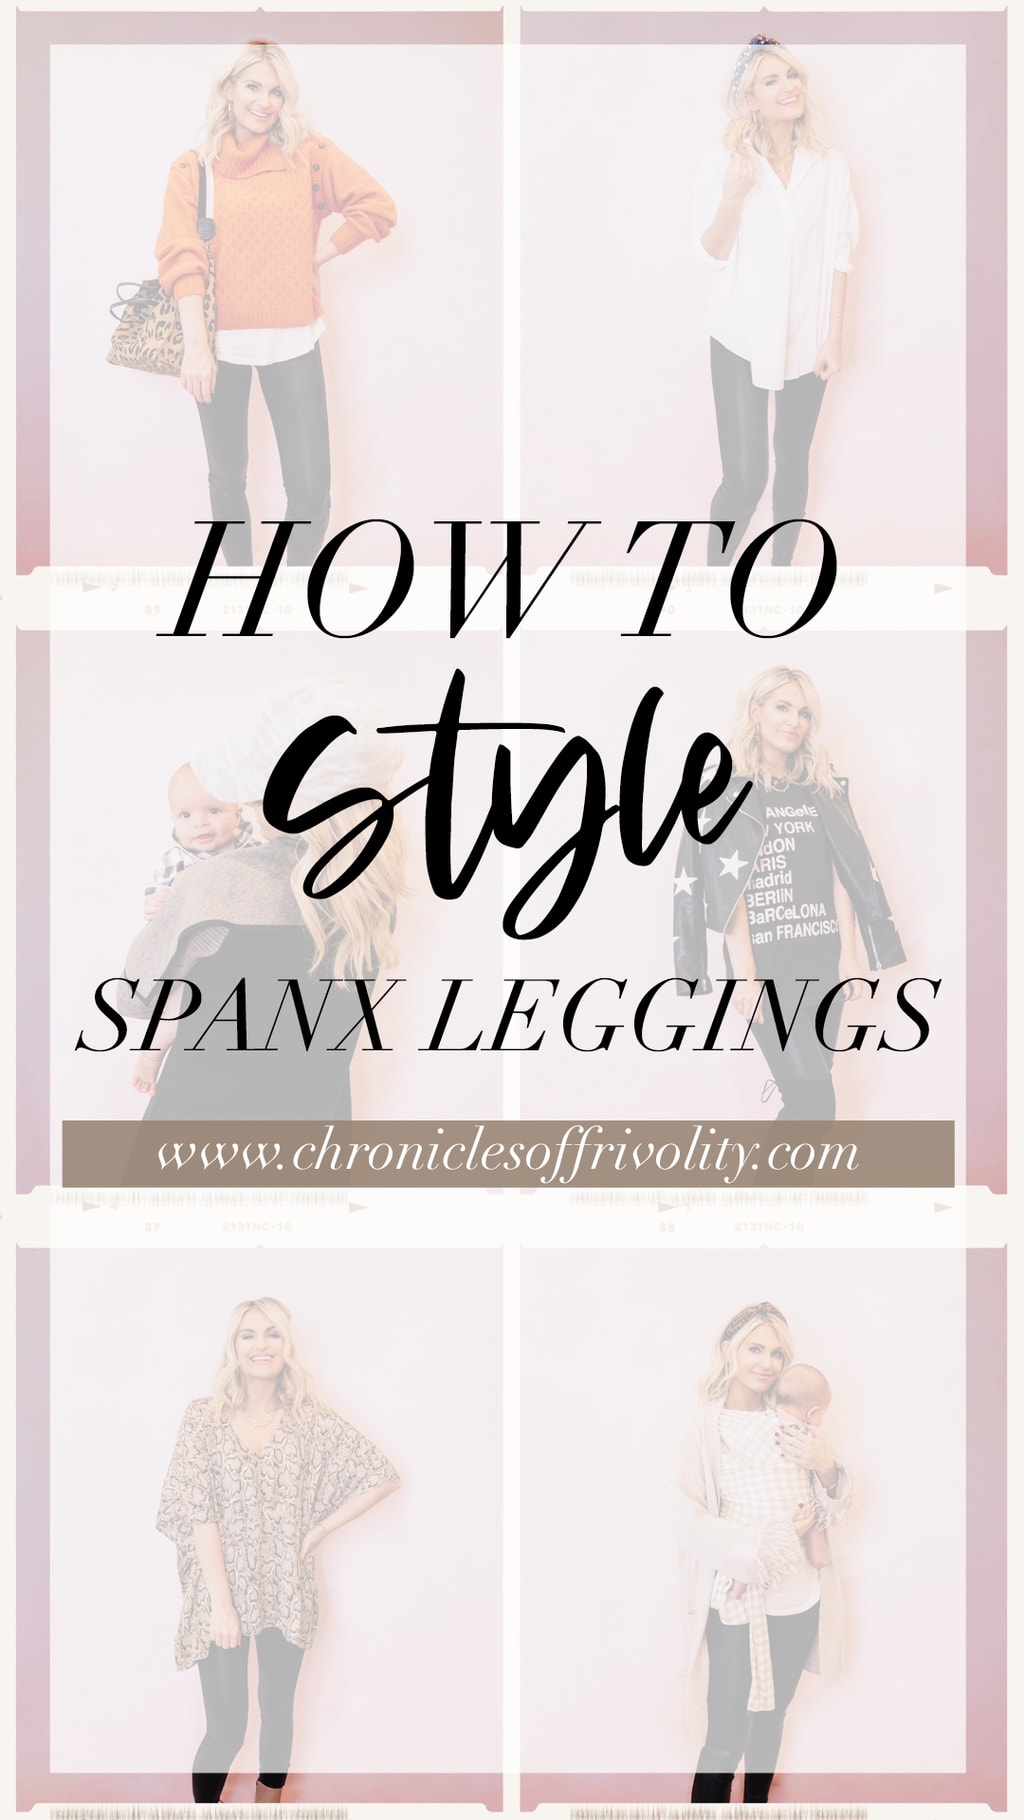 SPANX - Dress for yourself - even if it's only to hang out in your